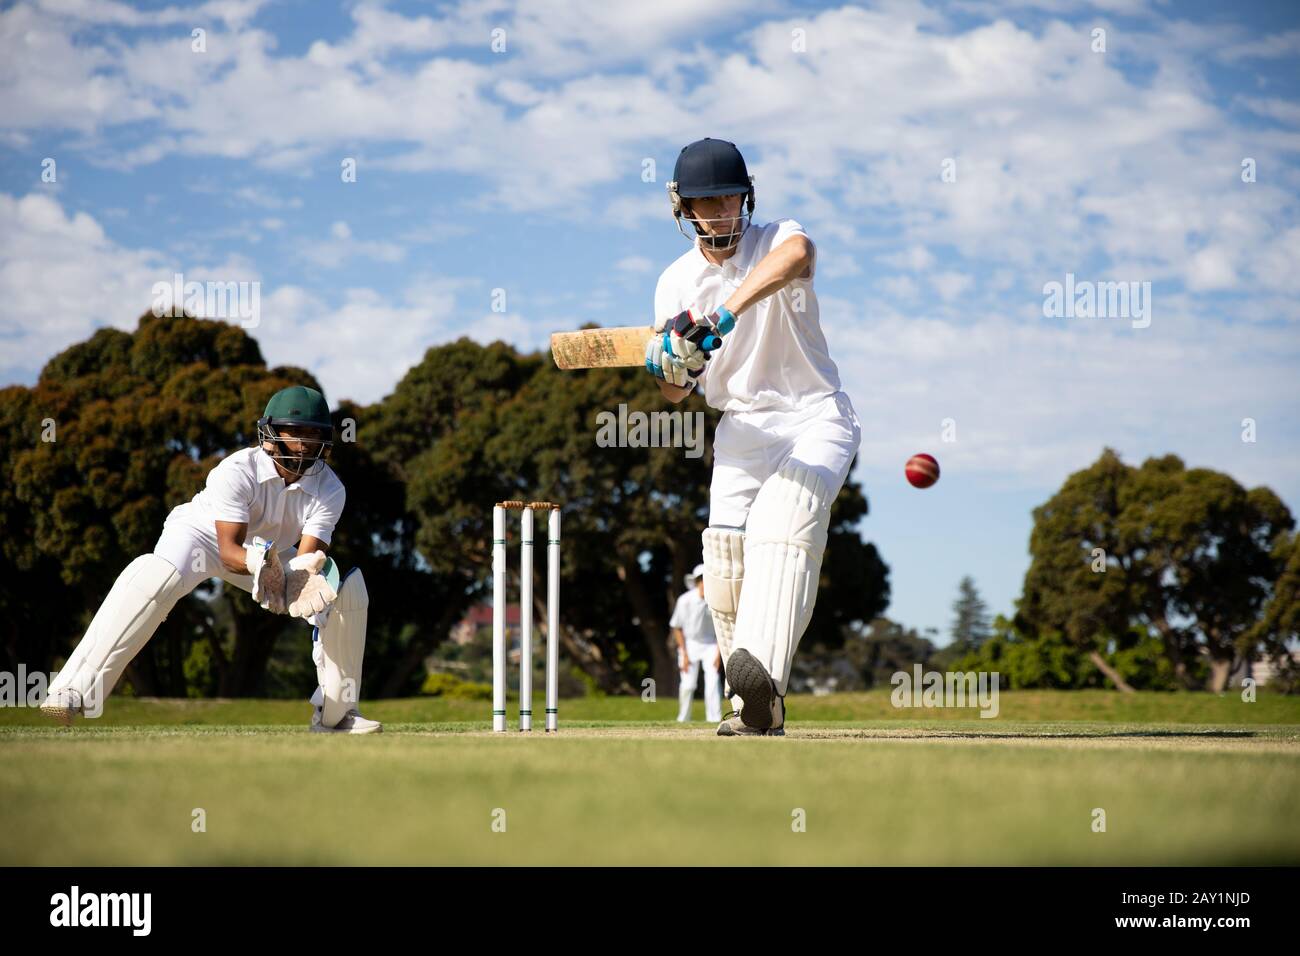 Cricket player shooting in the ball Stock Photo